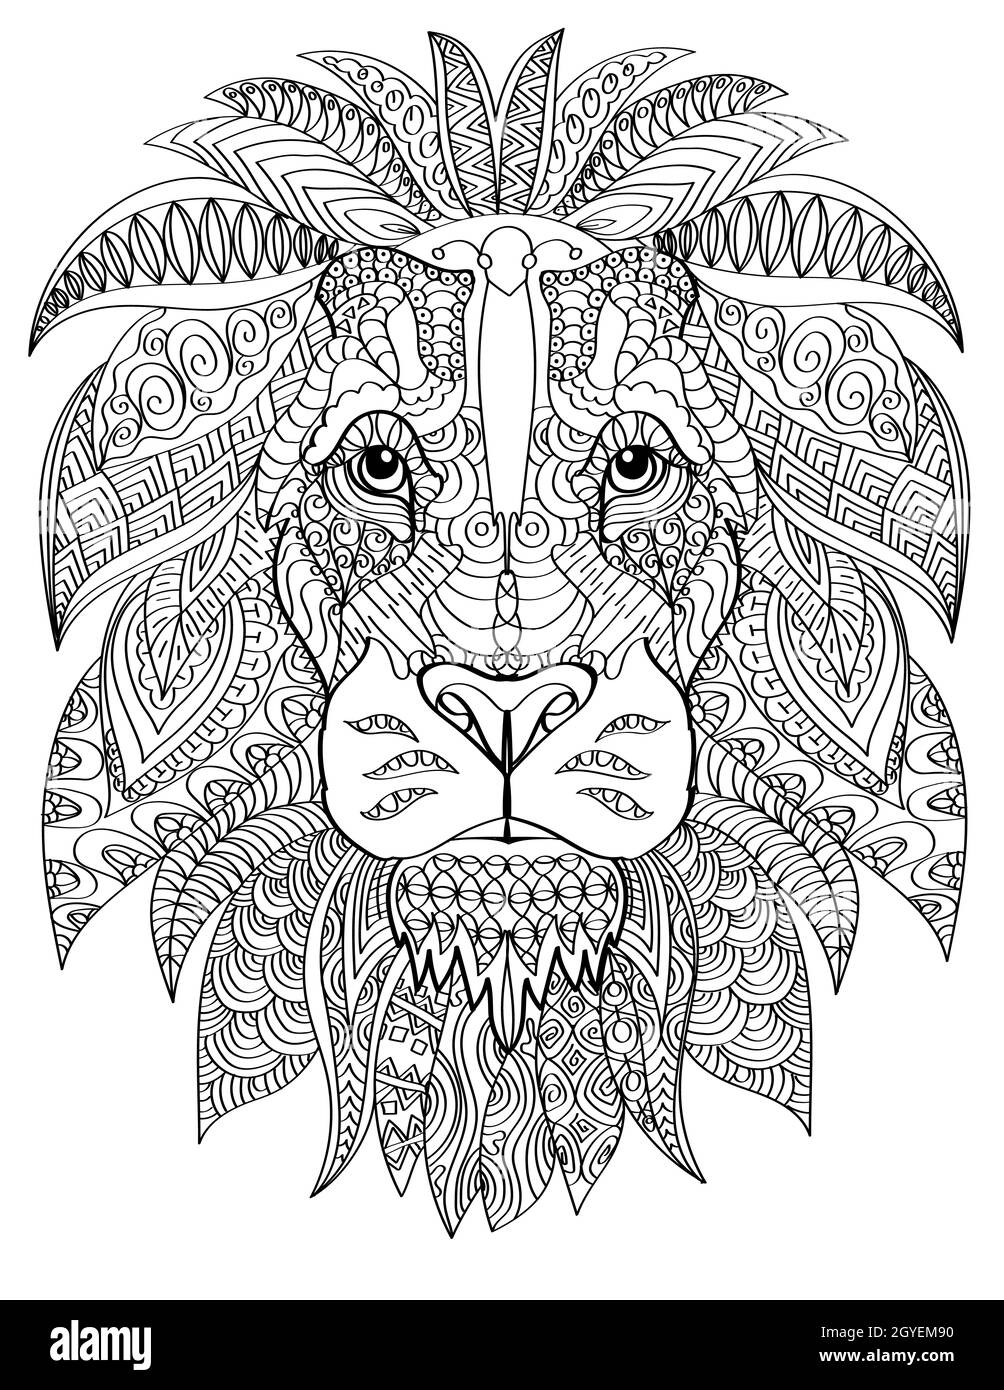 Lion Head Facing Forward With Healthy Furry Mane Colorless Line Drawing. Stock Photo